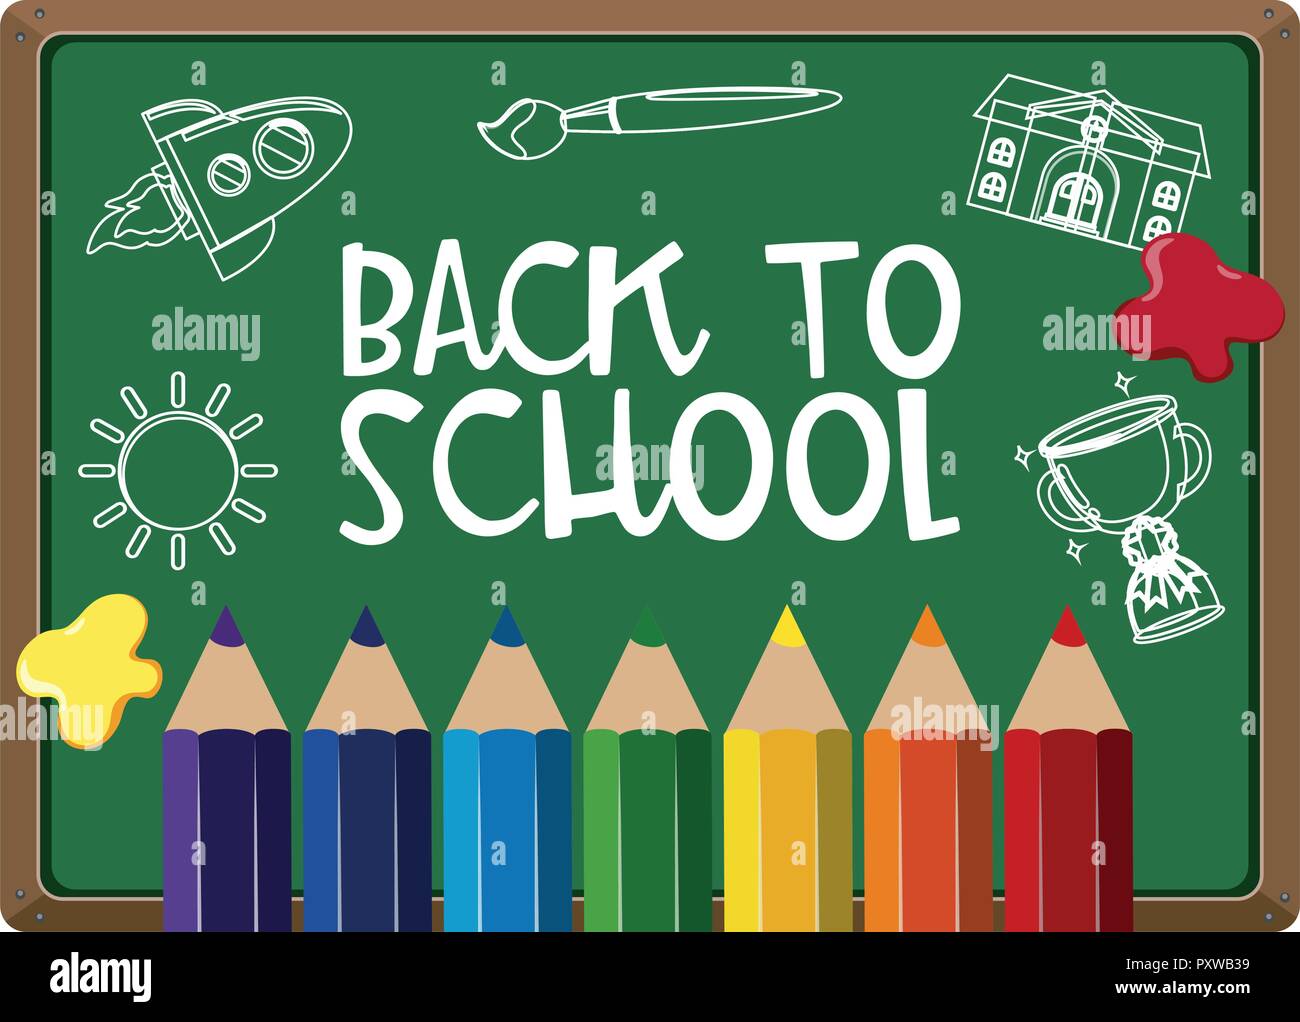 Poster design for back to school with colorpencils illustration Stock Vector